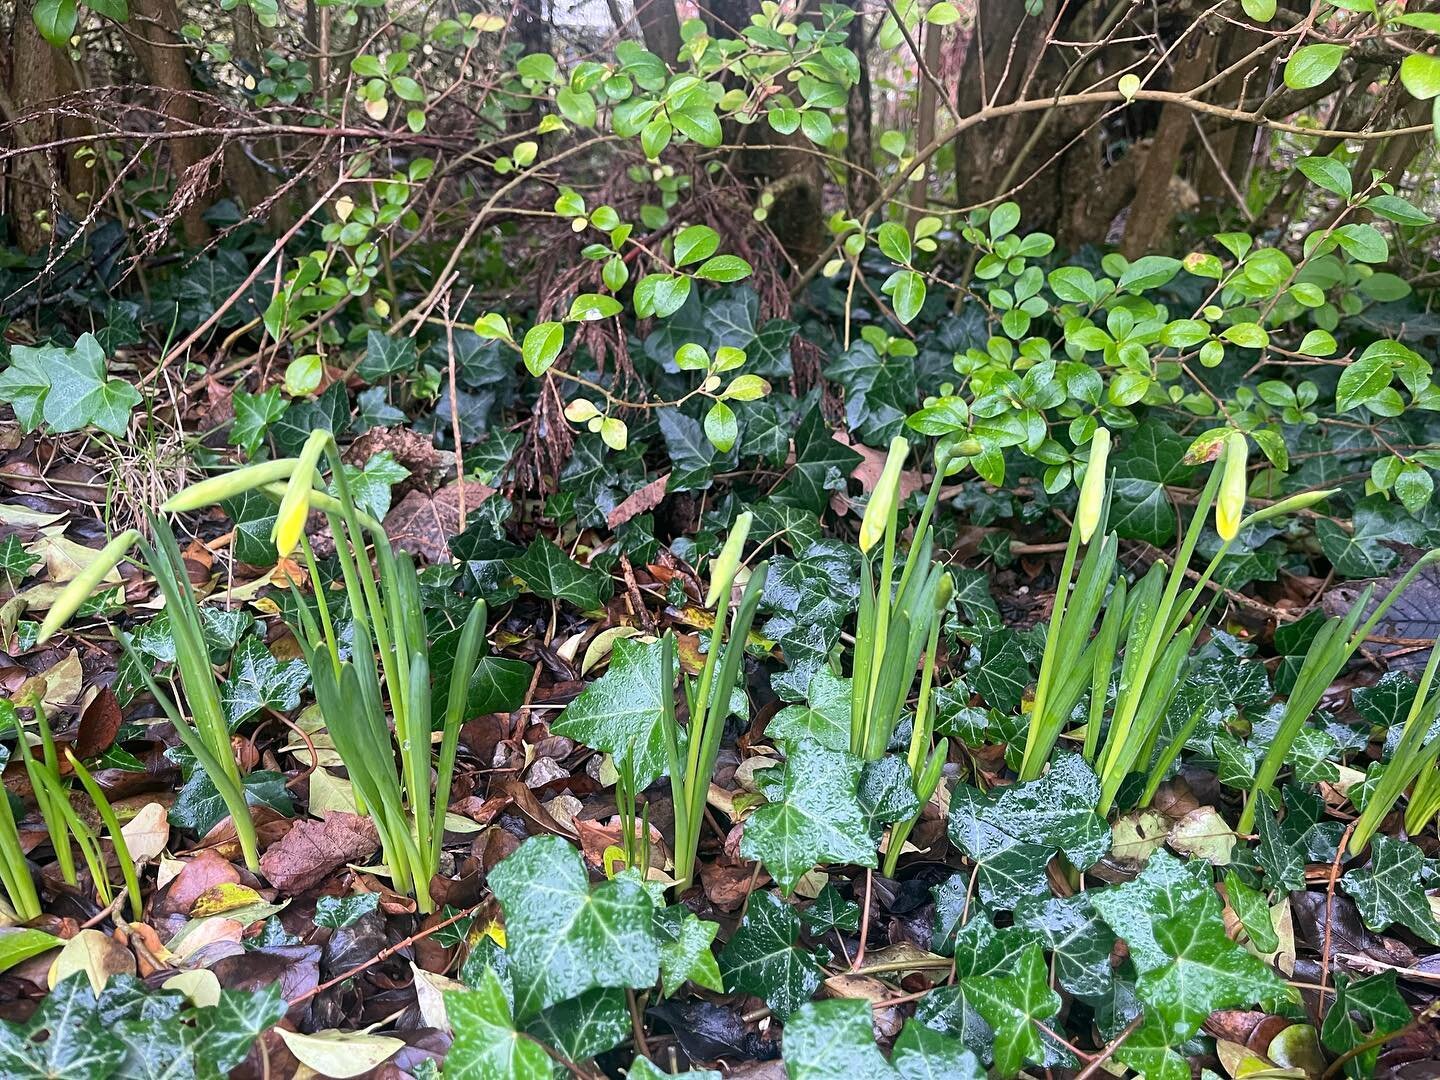 How lovely to see these snowdrops in bloom and daffodils pushing through when I came outside today - when journaling this morning I chose hope, optimism and energy as the qualities I want to embody and bring to the world today and I feel these are so